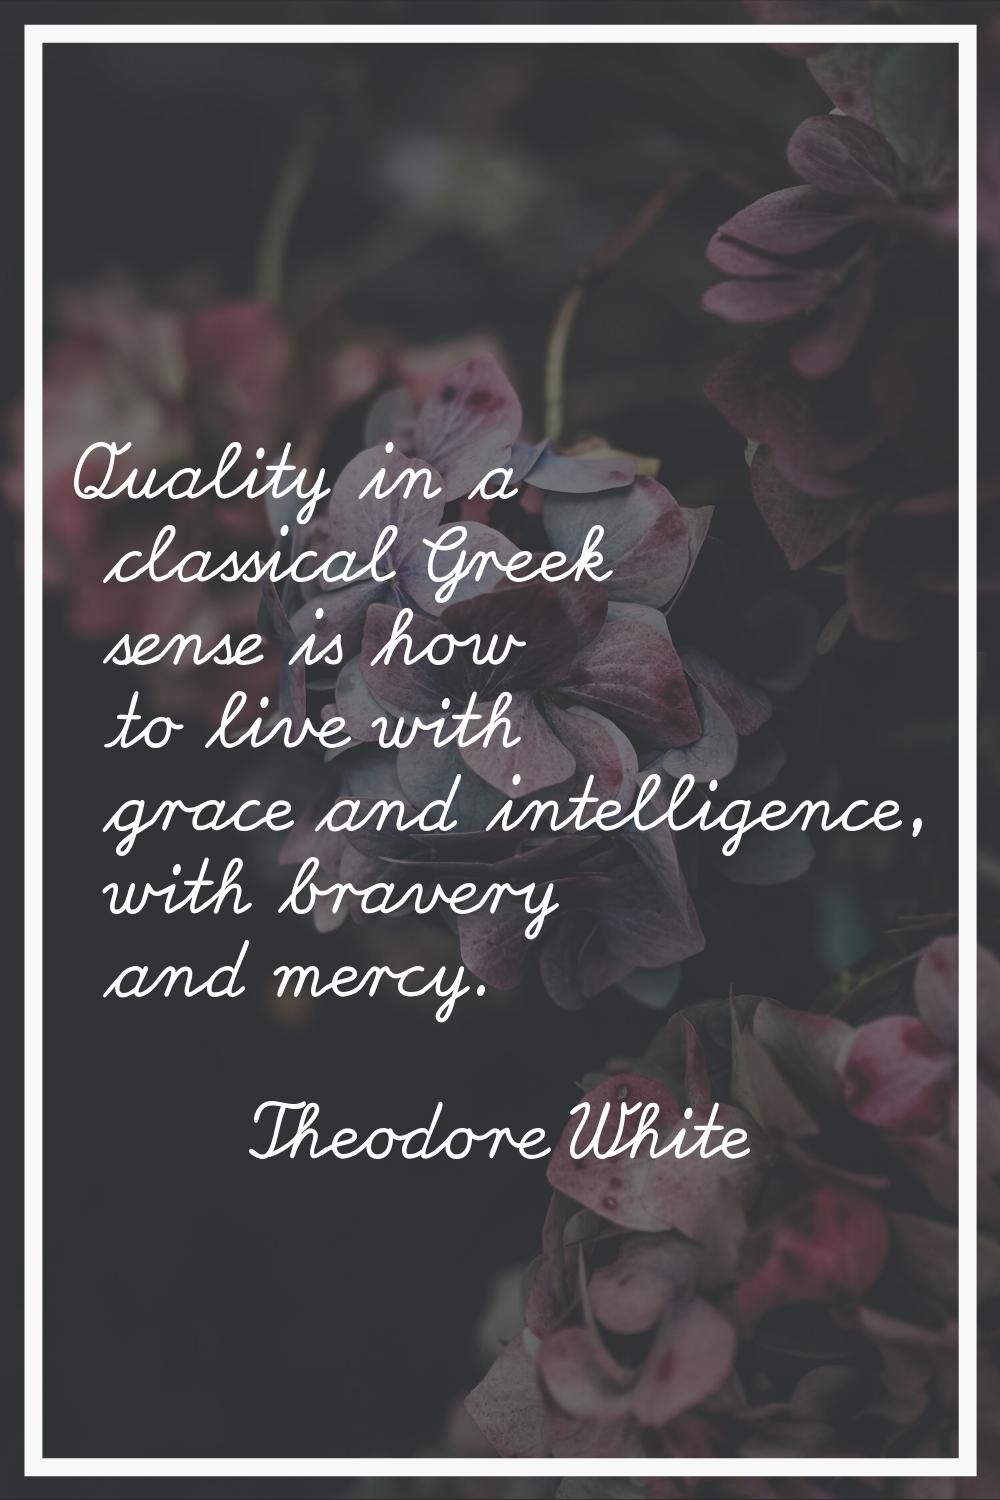 Quality in a classical Greek sense is how to live with grace and intelligence, with bravery and mer